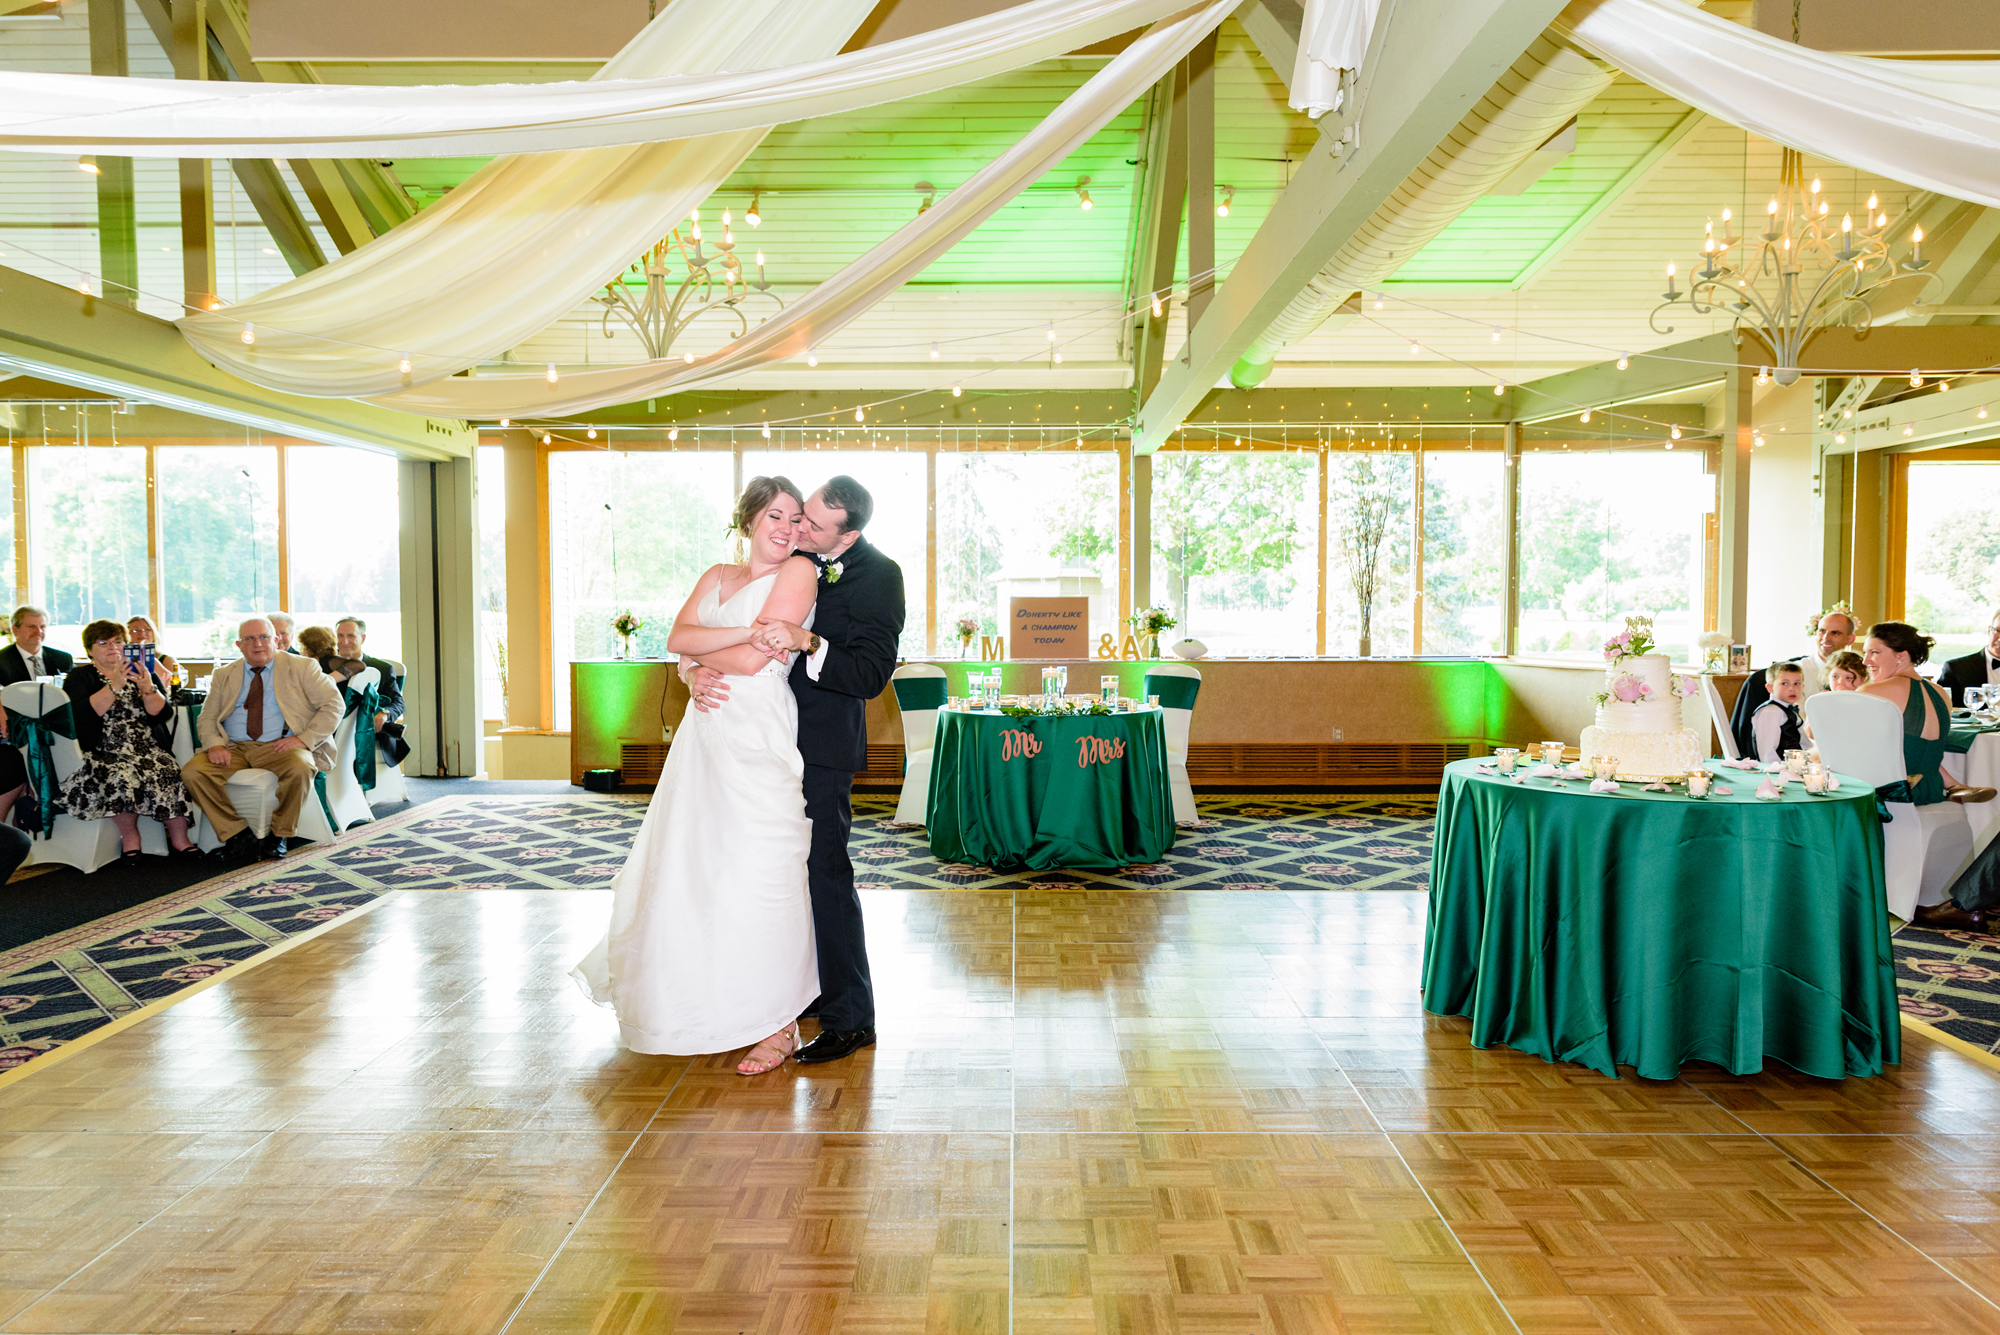 Bride & Groom’s first dance at a Wedding Reception at Morris Park Country Club